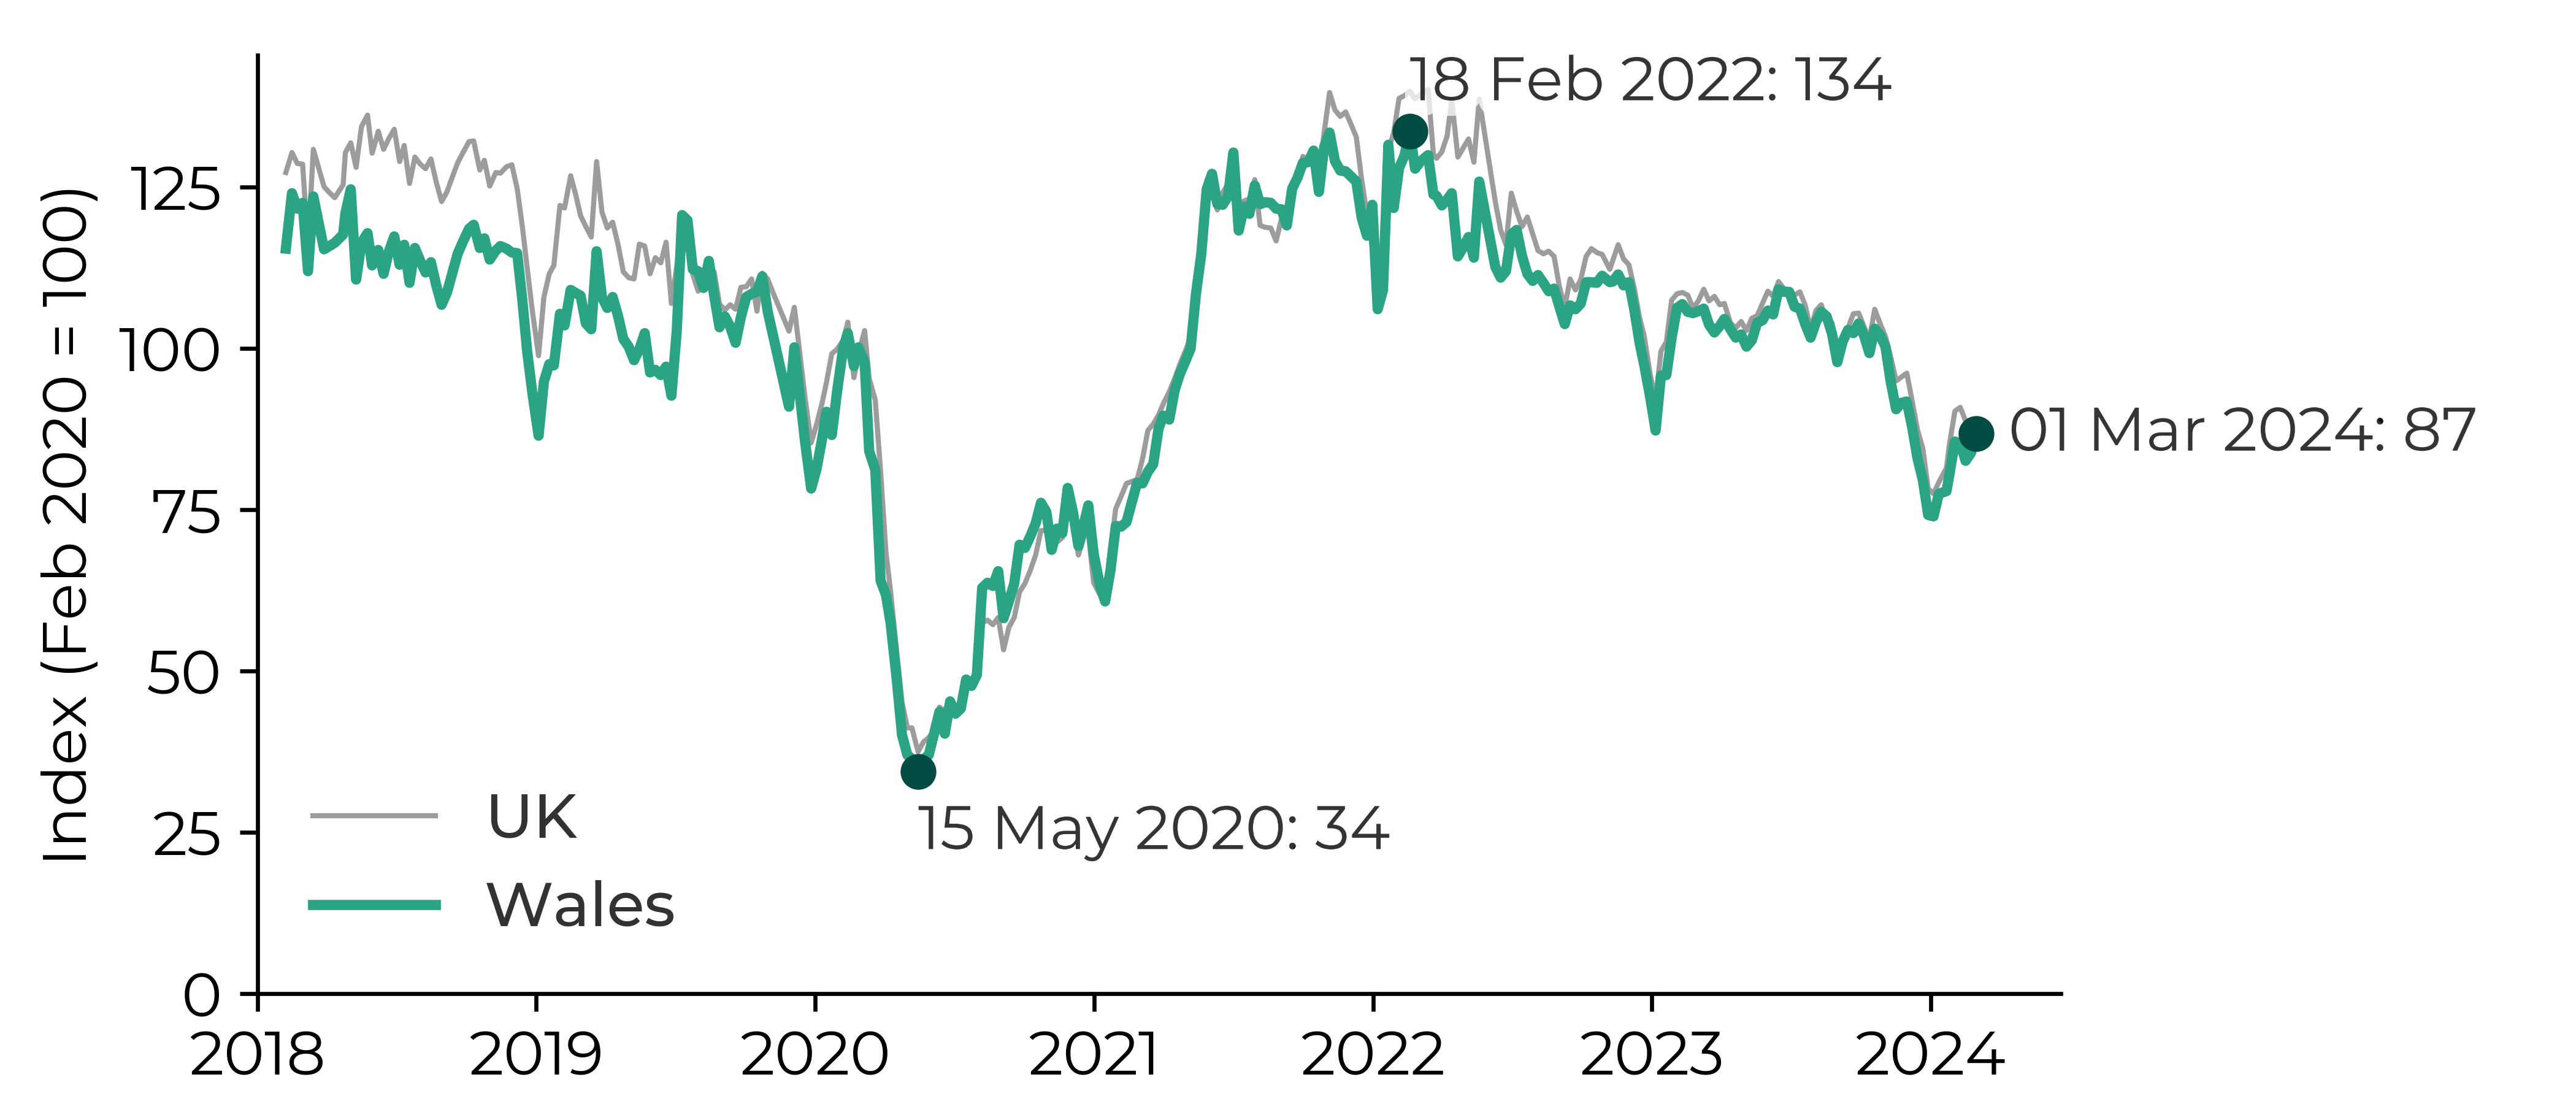 Graph showing that the index decreased from 100 in February 2020 to 34 in May 2020. The index increased to 134 by February 2022 and decreased to 87 by March 2024.